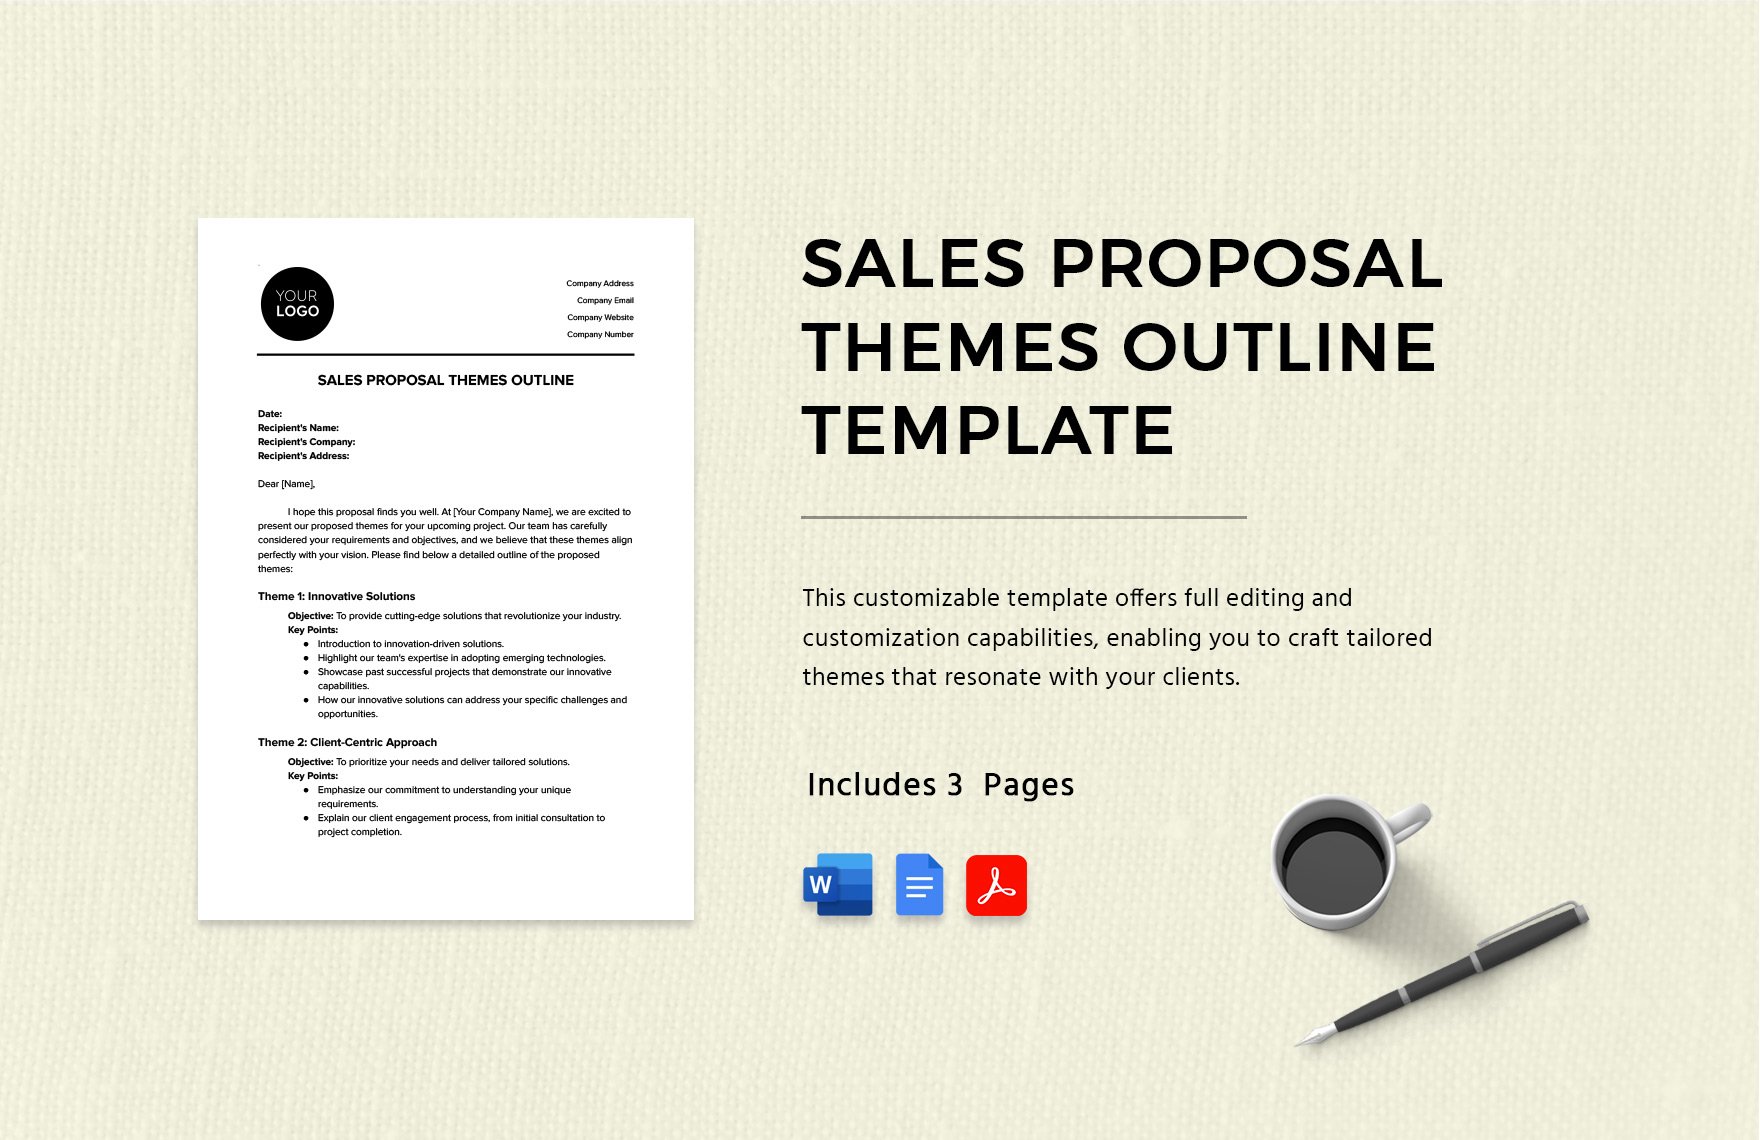 Sales Proposal Themes Outline Template in Word, Google Docs, PDF